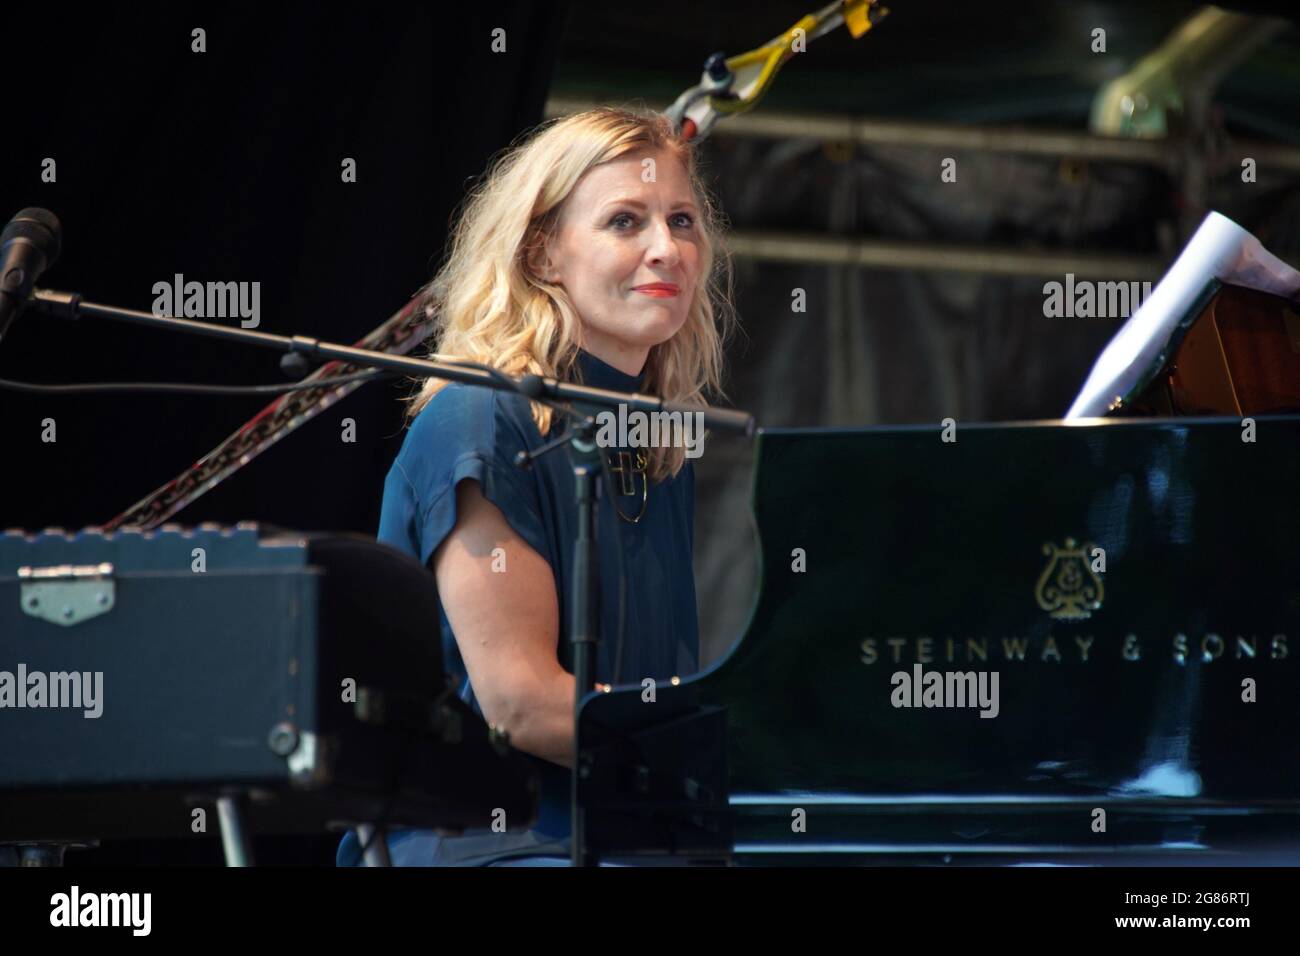 Timmendorfer Strand, Germany. 27th June, 2021. Ida Sand, real name Ida Kristina Sandlund, is a Swedish soul and jazz musician with vocals, piano and electric piano. Credit: Lutz Knauth/dpa-Zentralbild/ZB/dpa/Alamy Live News Stock Photo